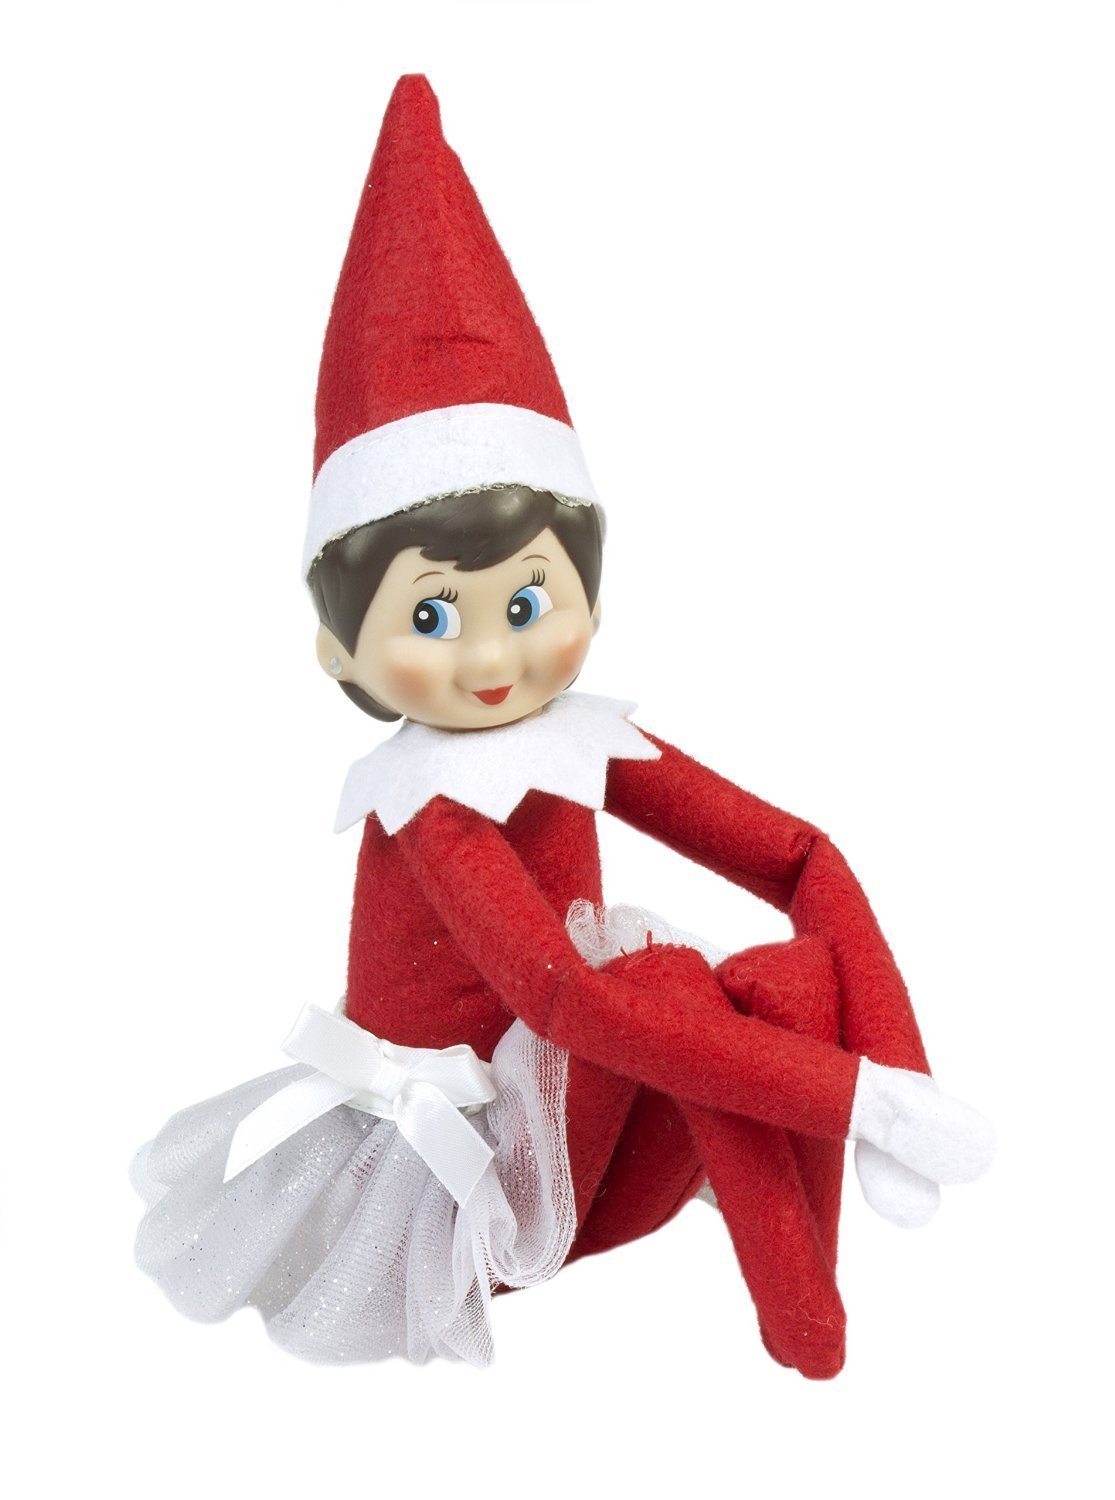 When Did Elf On The Shelf Come Out